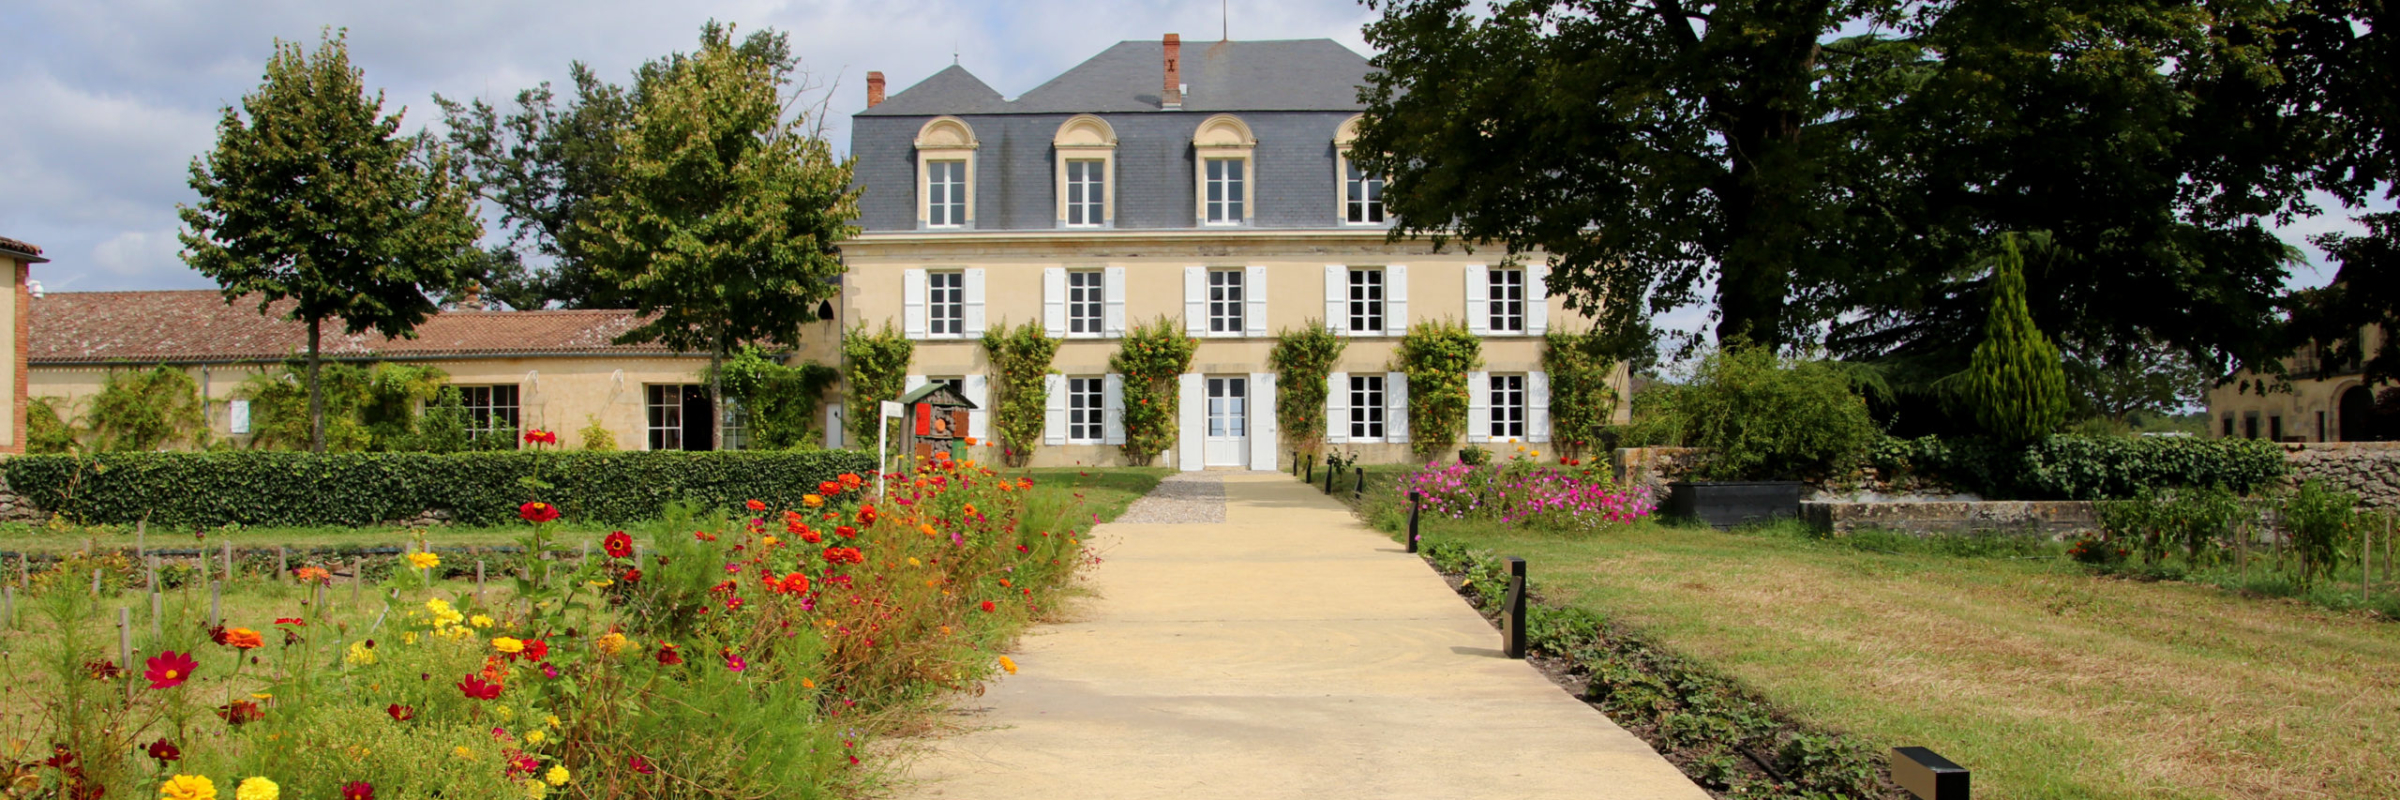 A long paved walkway leads to the main chateau and is lined with beds of marigolds